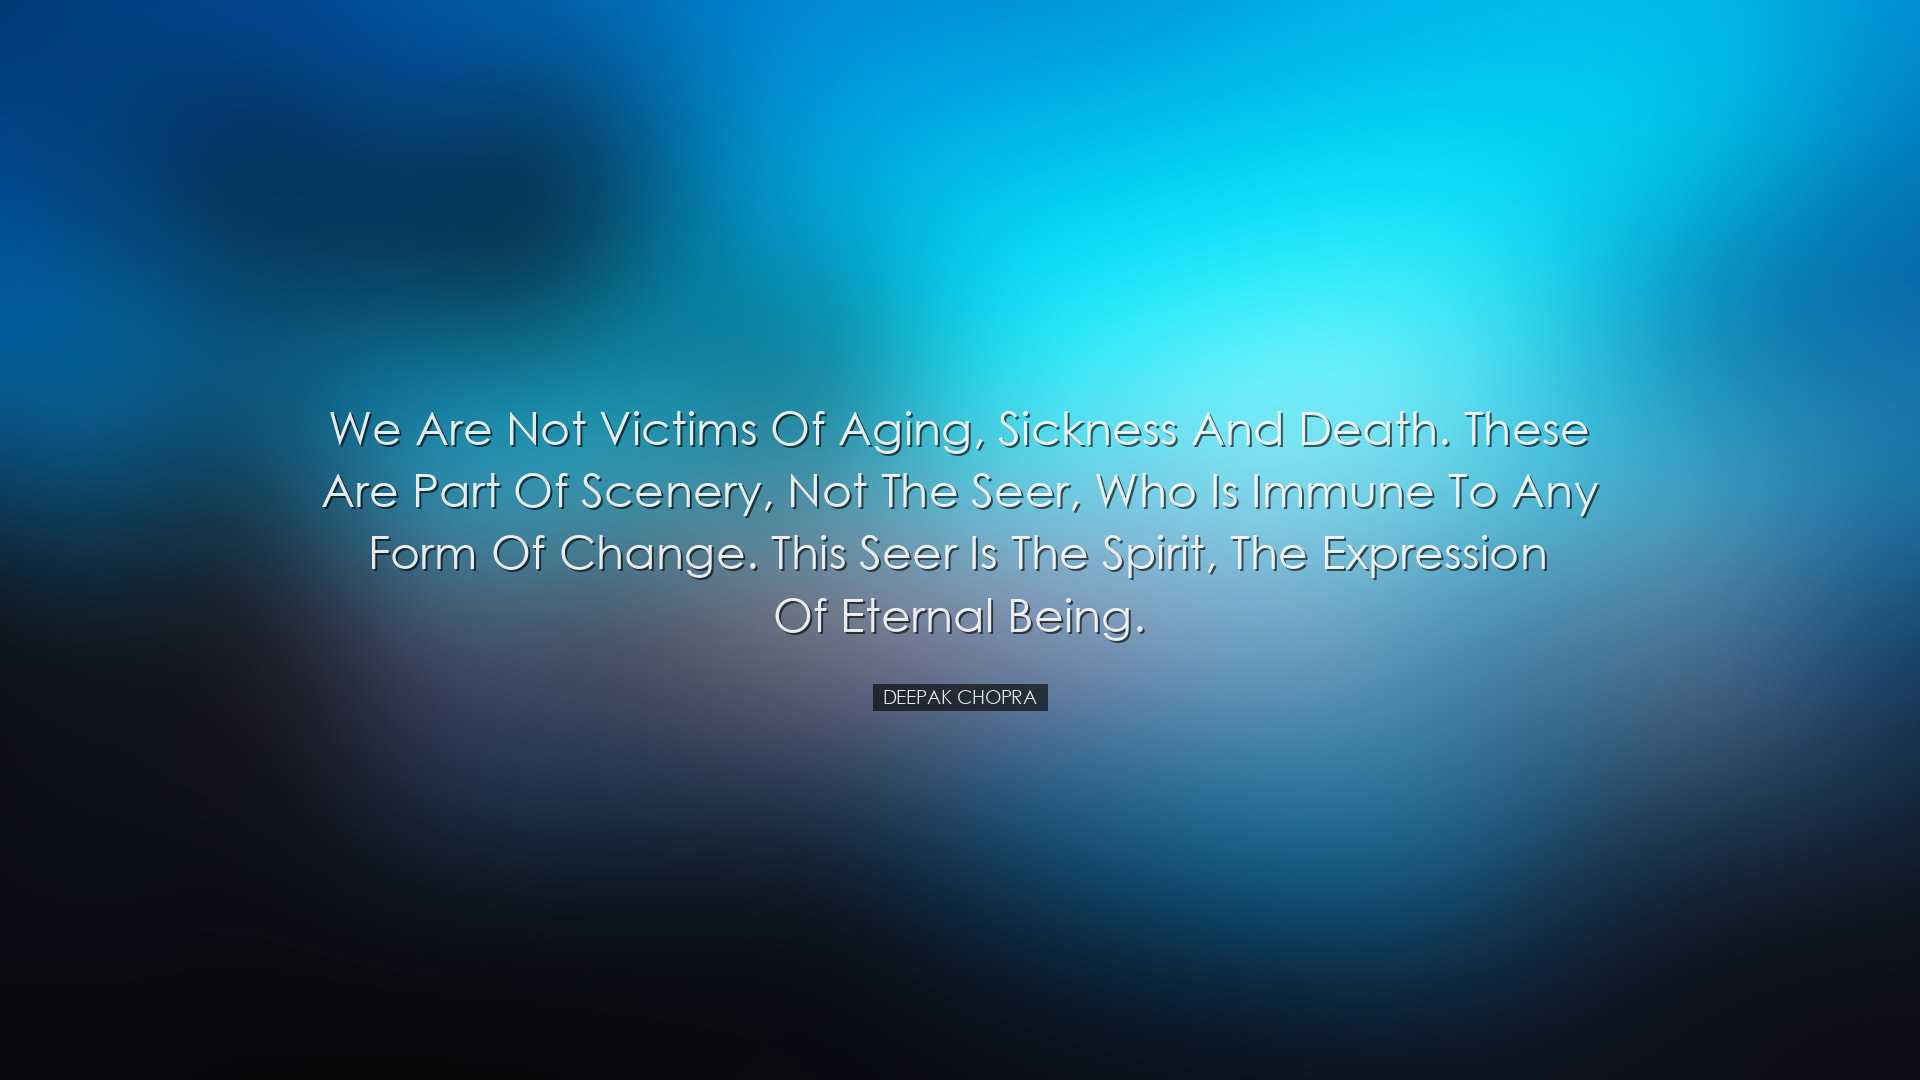 We are not victims of aging, sickness and death. These are part of